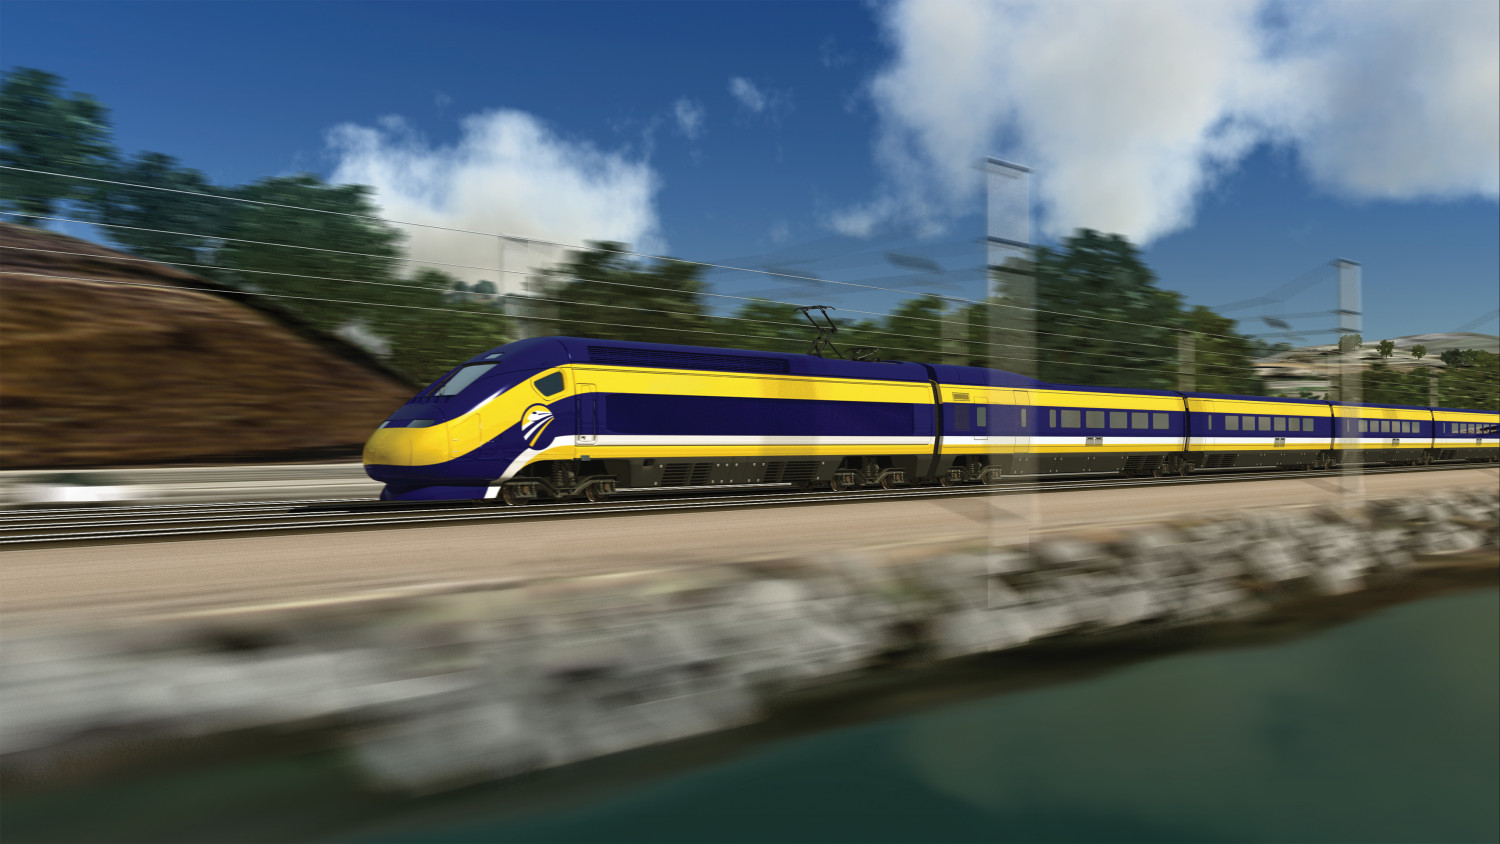 California High Speed Railway Estimated to Cost $79B: Report